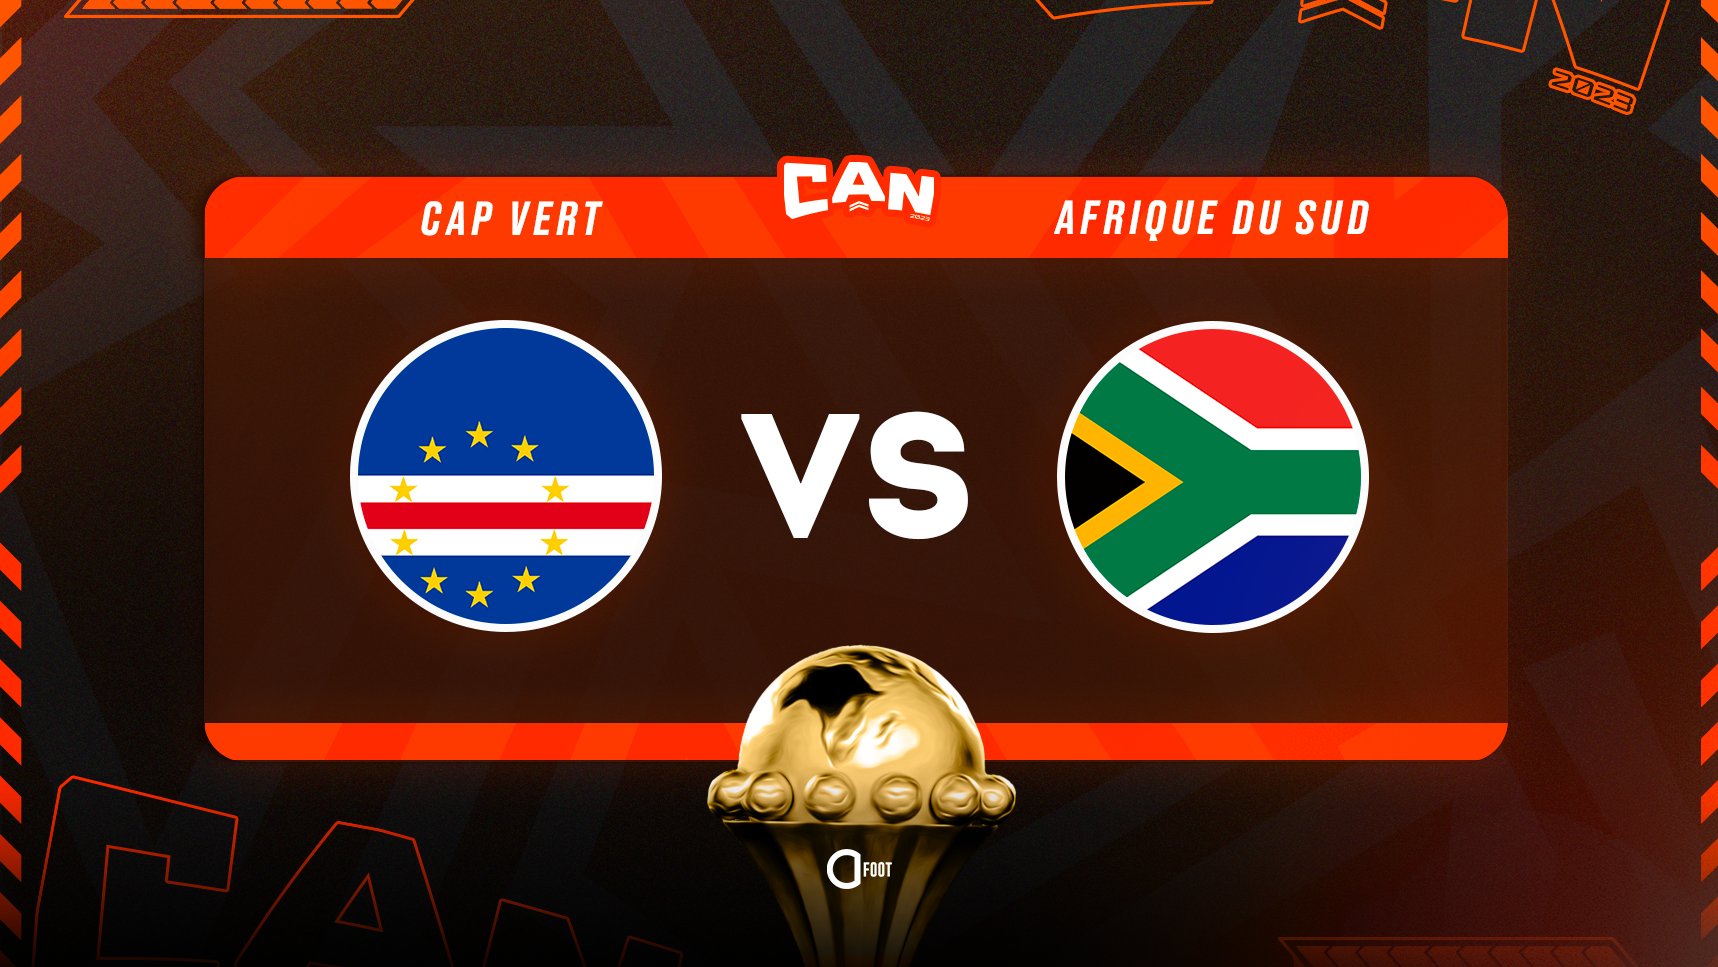 Live stream of the match between South Africa and Cape Verde in the CAF des Nations in high quality